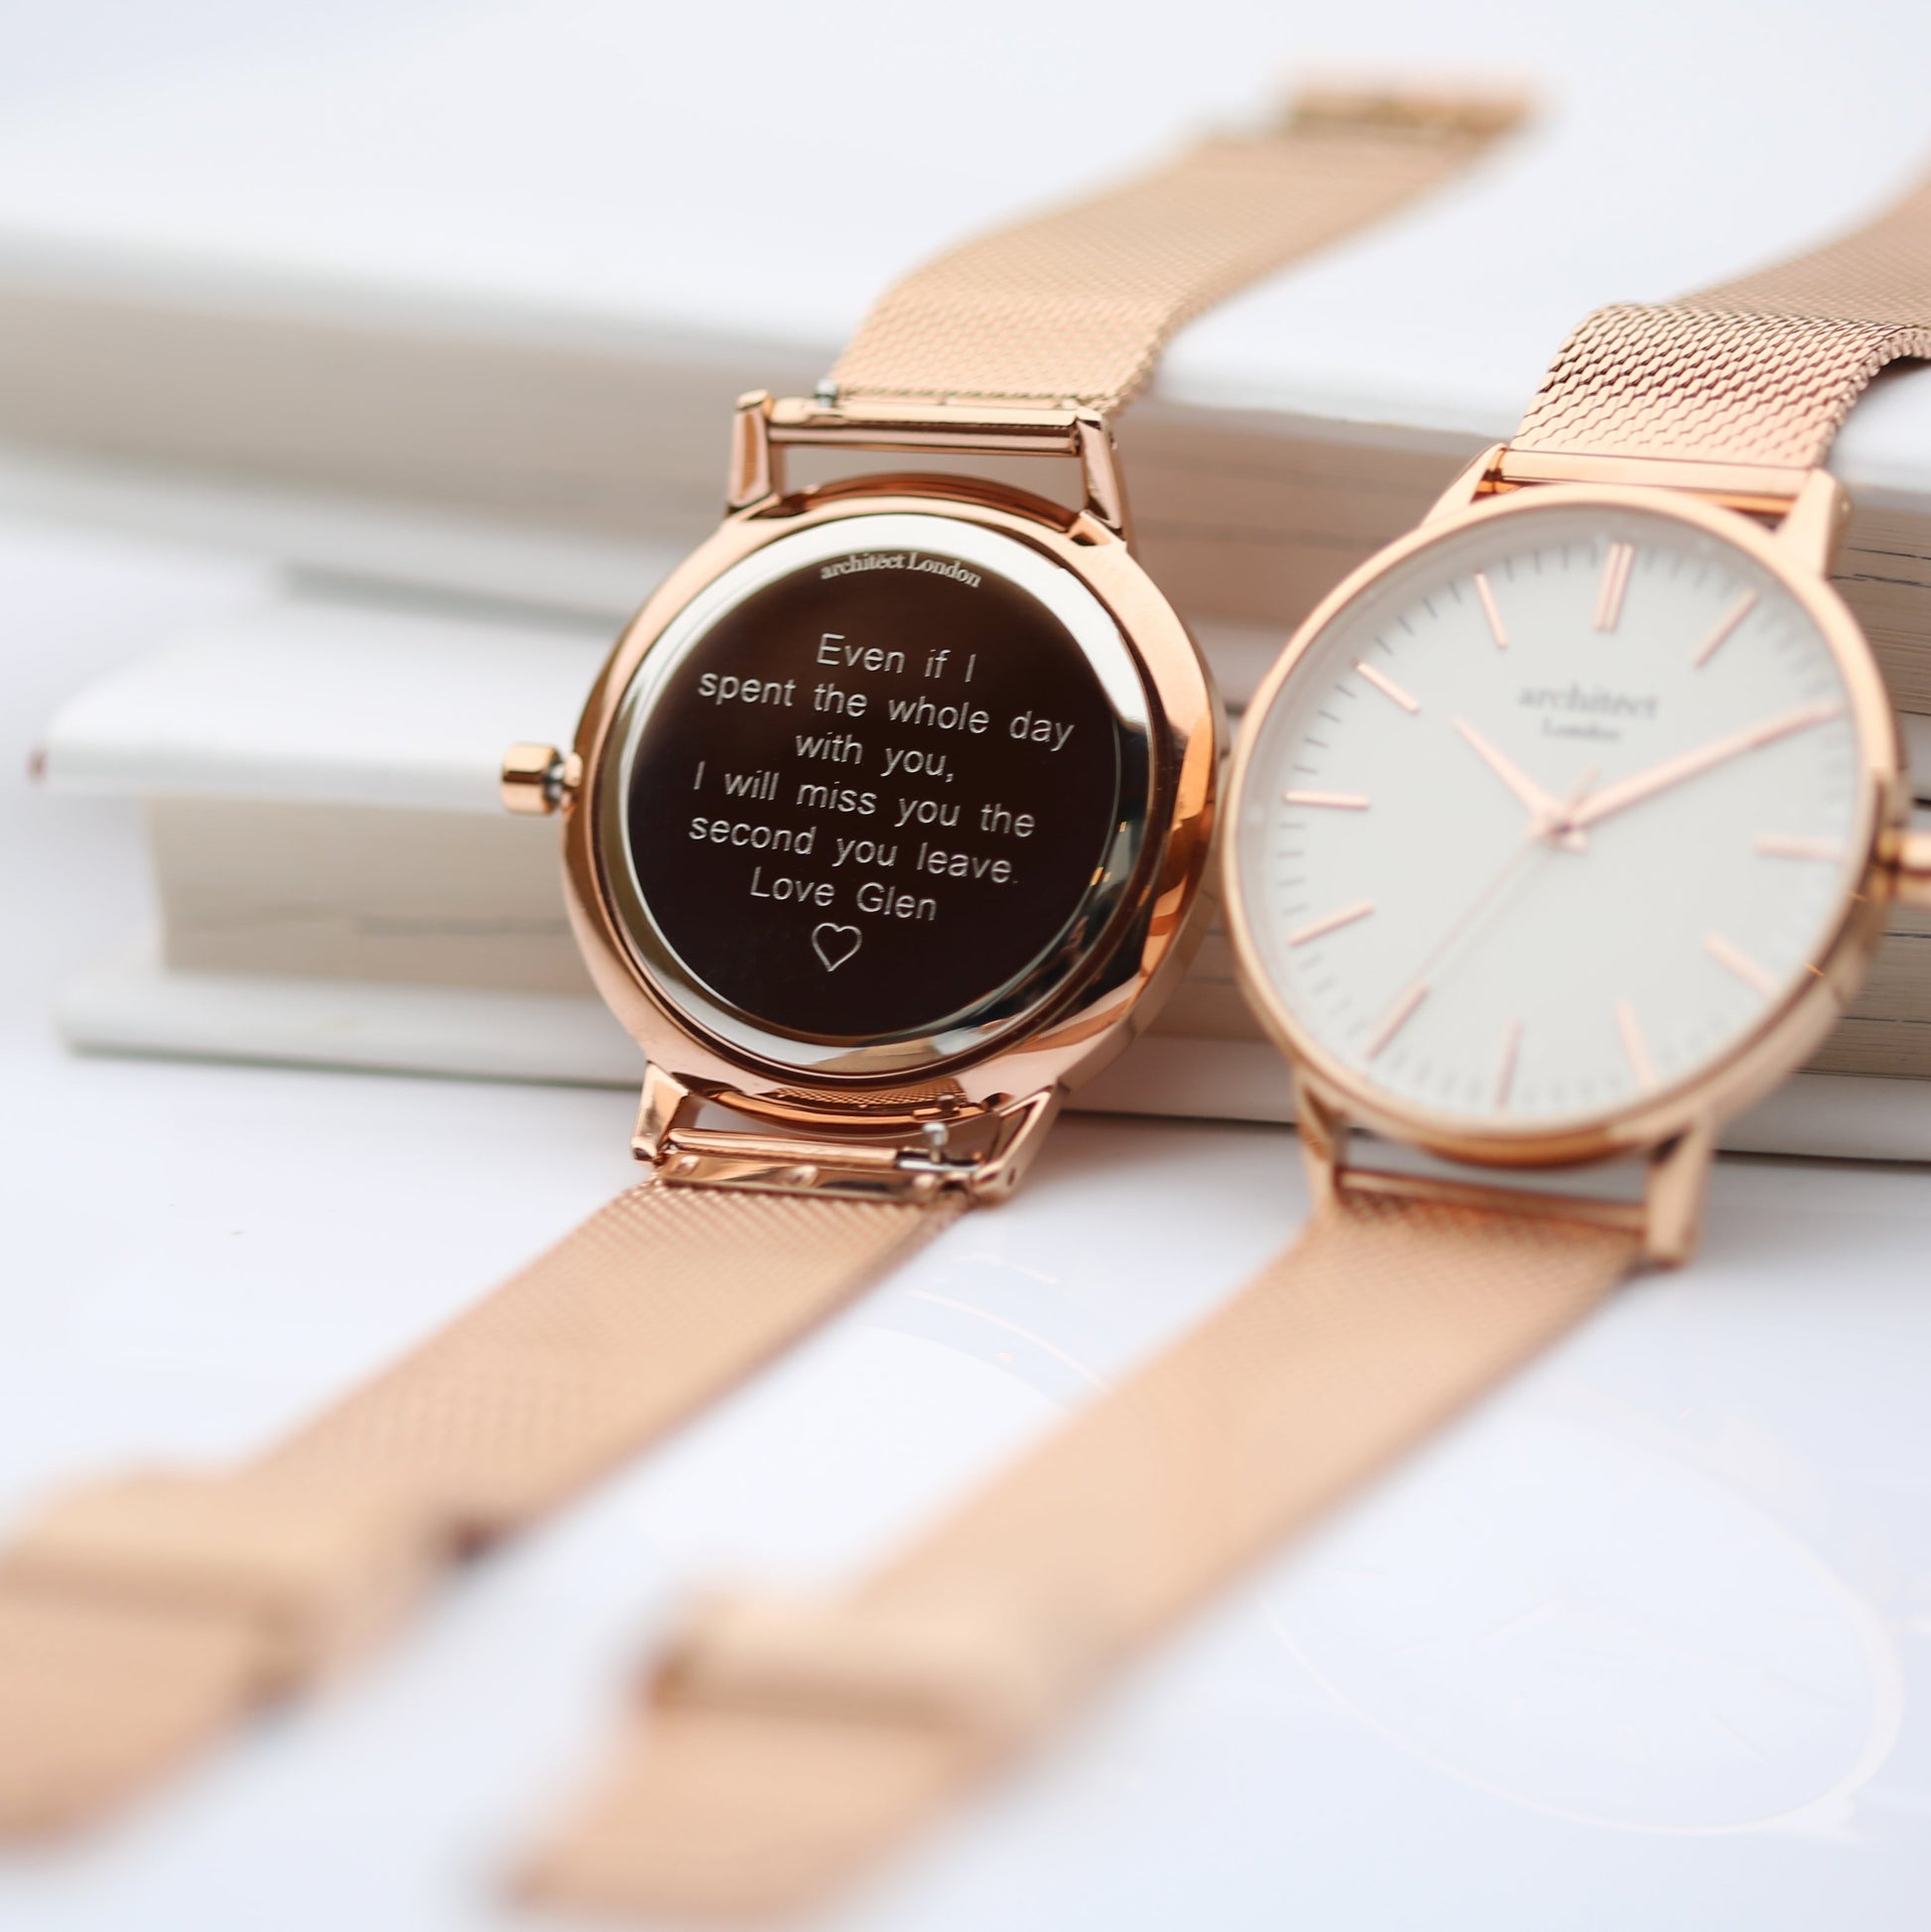 Personalized Ladies' Watches - Women's Engraved Watch In Rose Gold 